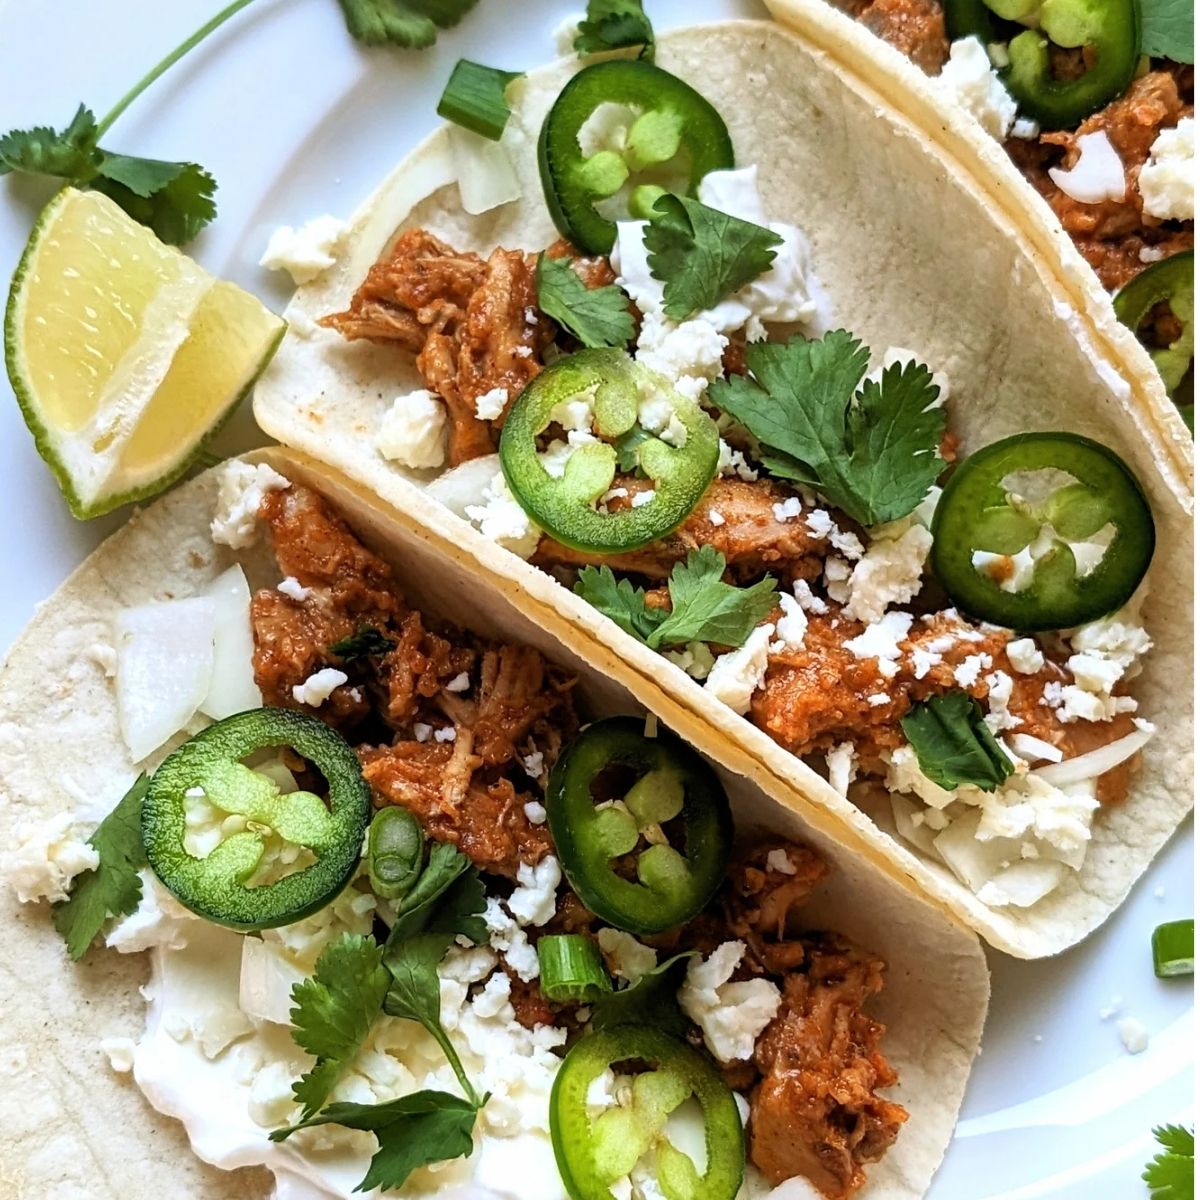 low sodium chicken taco recipe with corn tortillas, jalapenos, cilantro, and low salt queso fresco mexican cheese